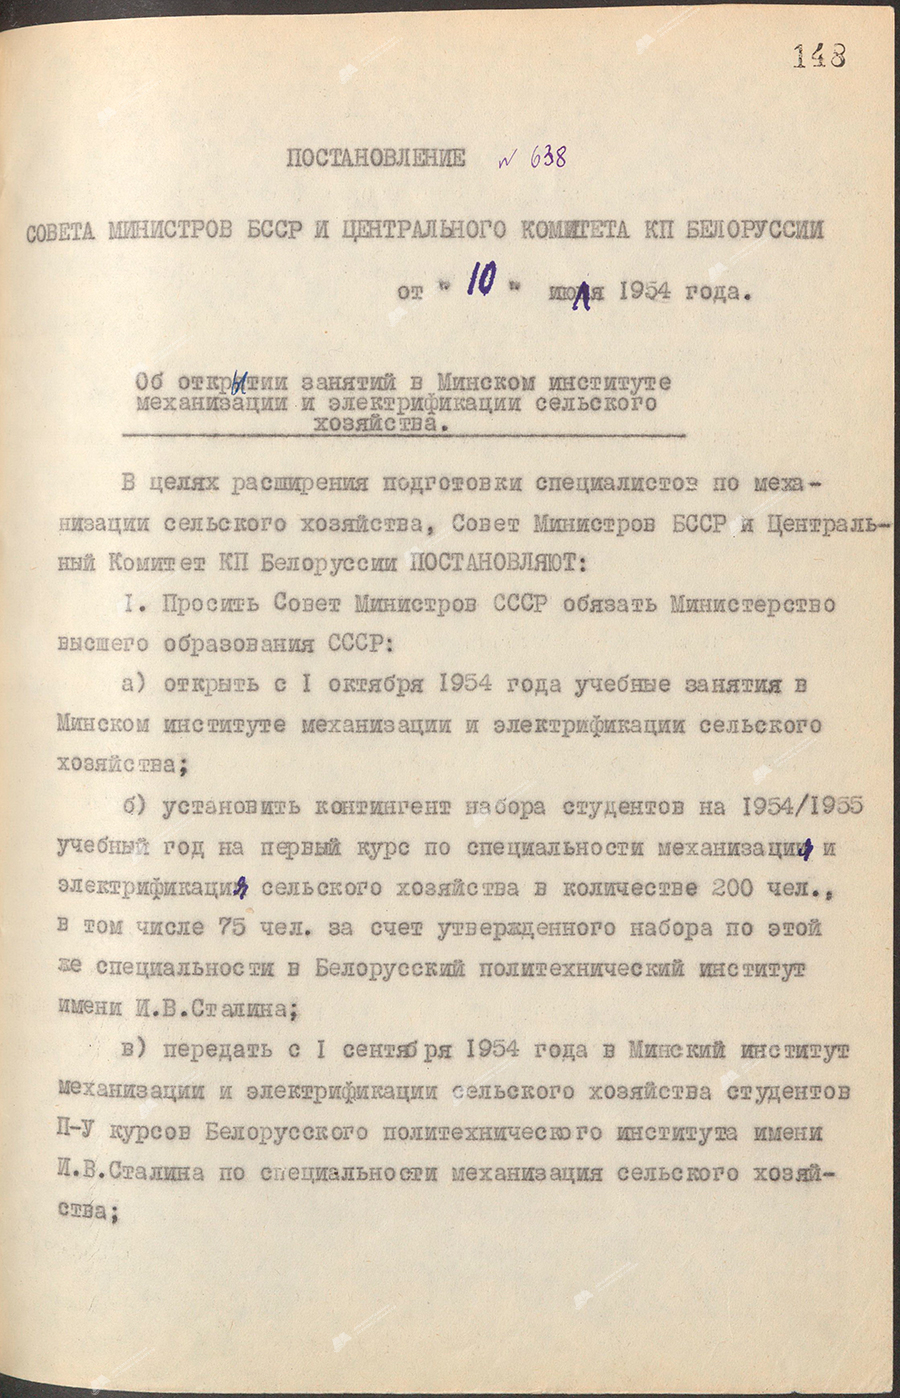 Resolution No. 638 of the Council of Ministers of the Byelorussian SSR and the Central Committee of the Communist Party of Belarus «On the opening of classes at the Minsk Institute of Mechanization and Electrification of Agriculture»-с. 0